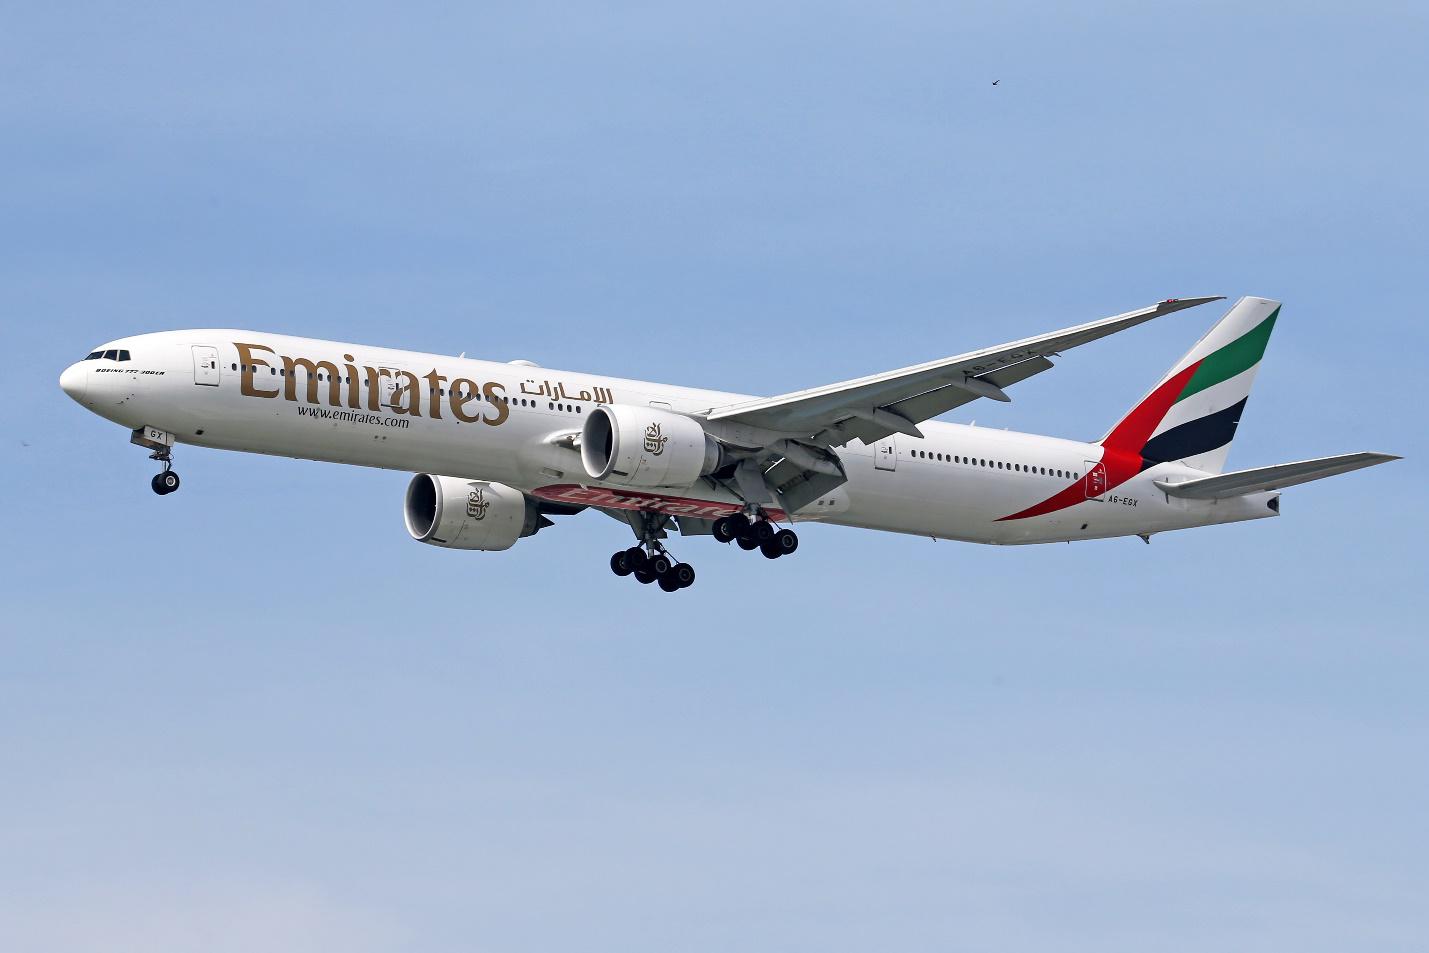 Visit The Most Extraordinary Places By Going With Emirates Flight Booking – Earth’s Attractions